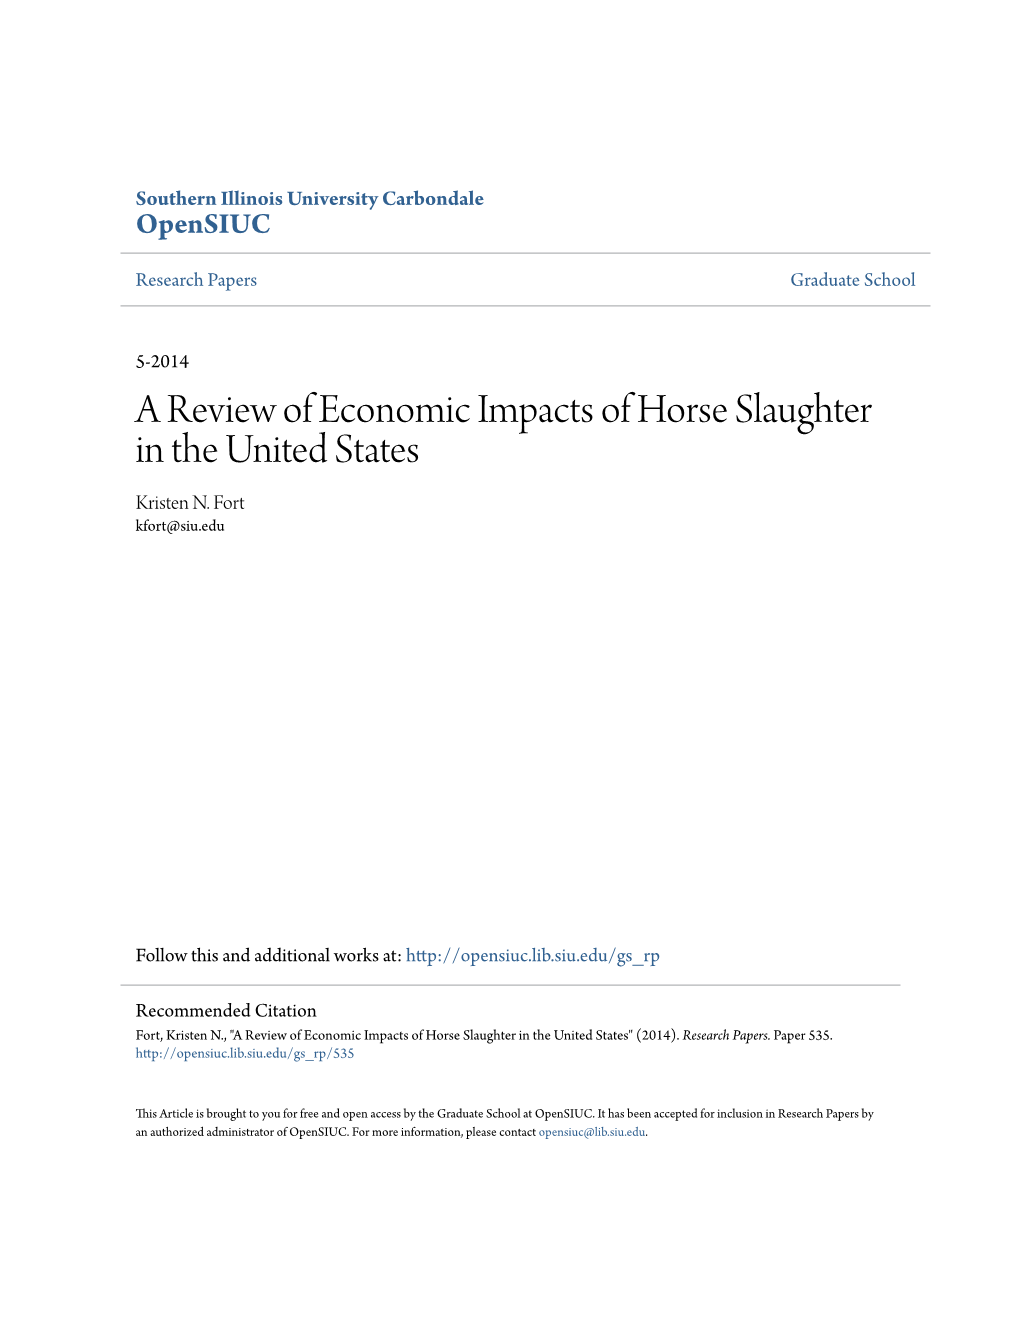 A Review of Economic Impacts of Horse Slaughter in the United States Kristen N